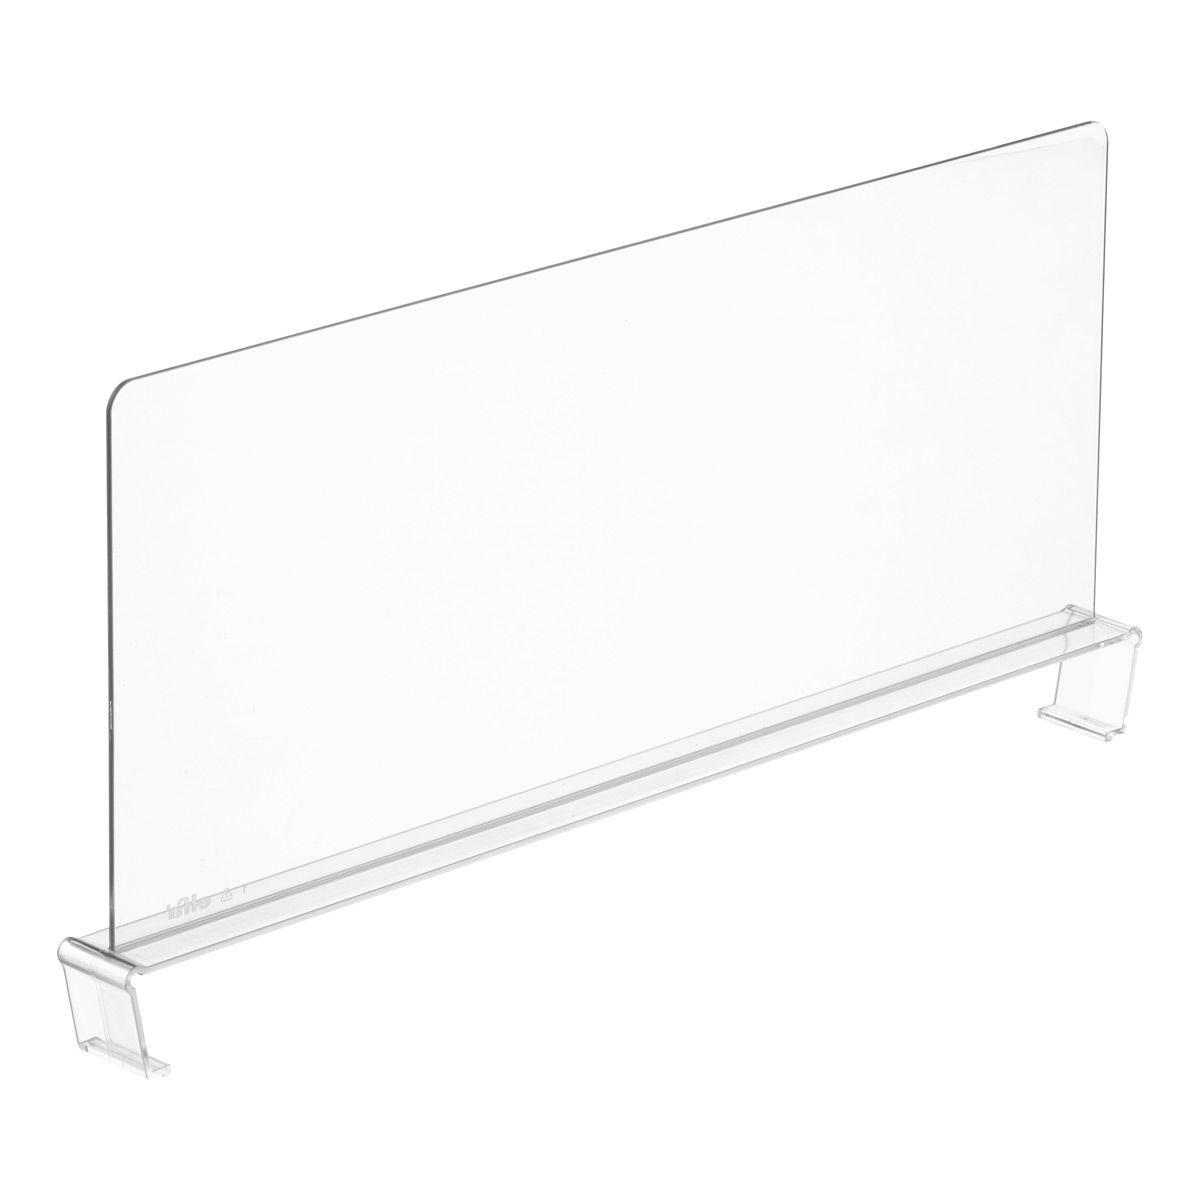 Elfa Décor Shelf Dividers | The Container Store